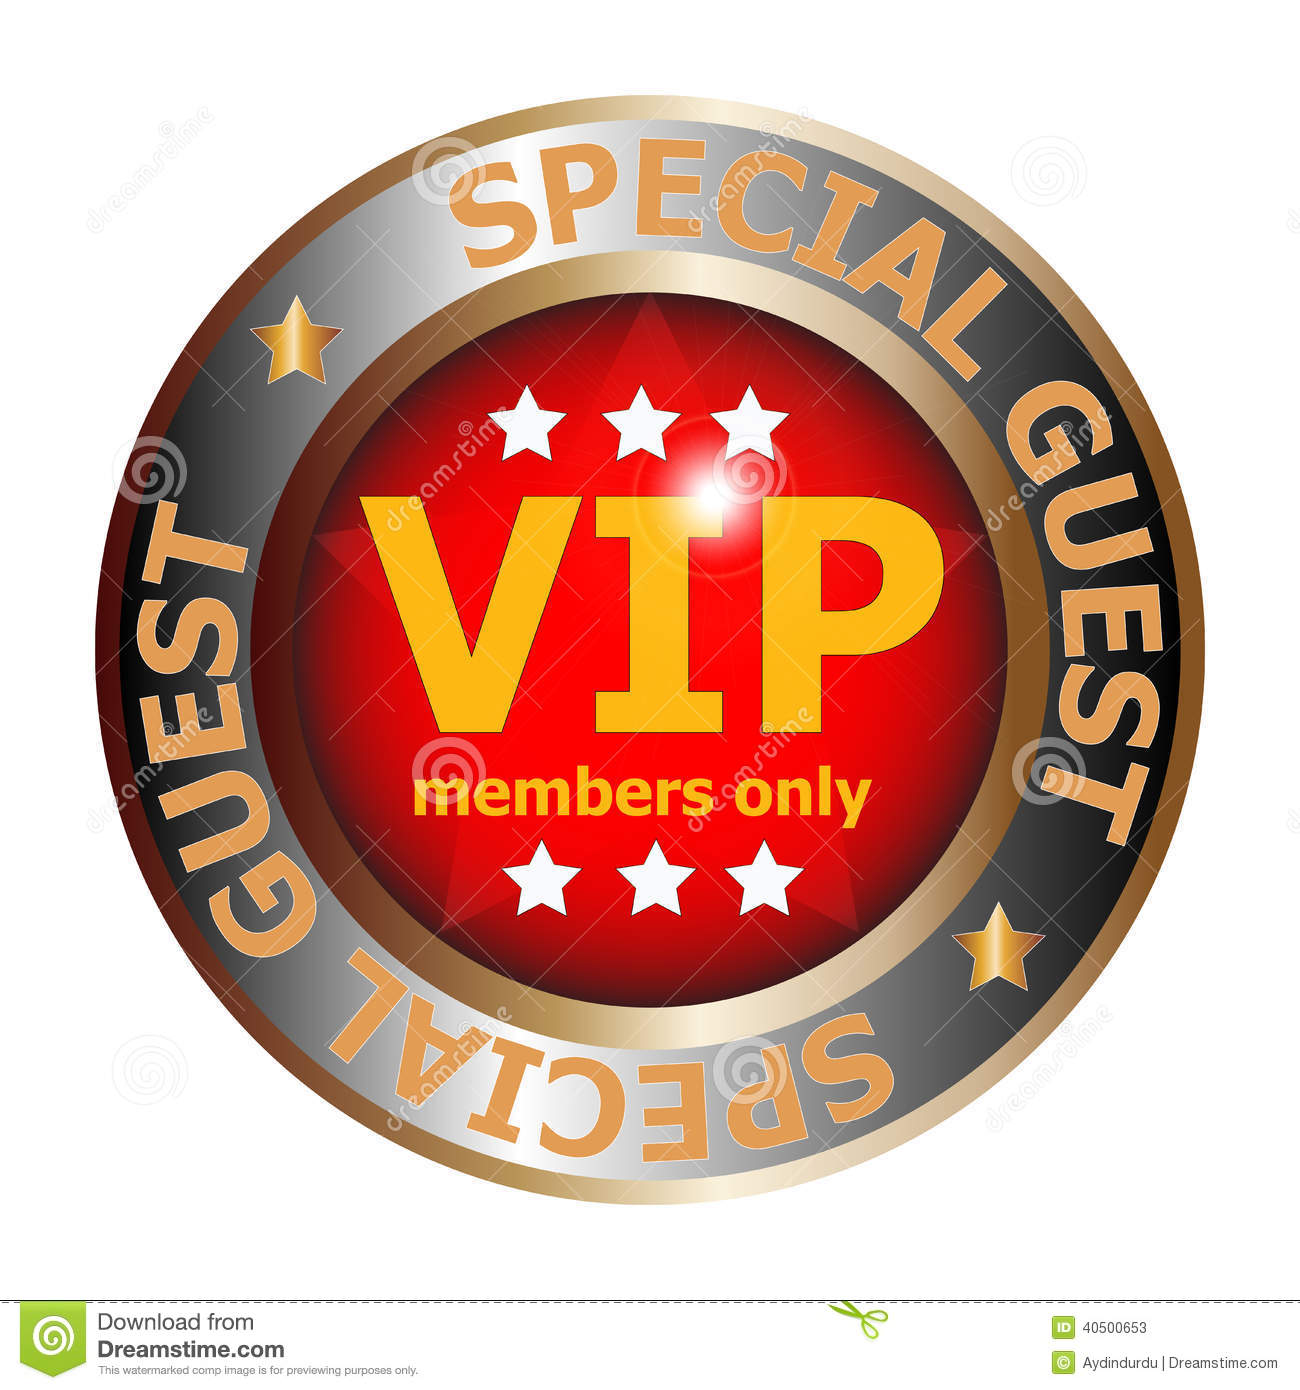 Illustration Of A Special Guest Vip Badge Isolated On A White